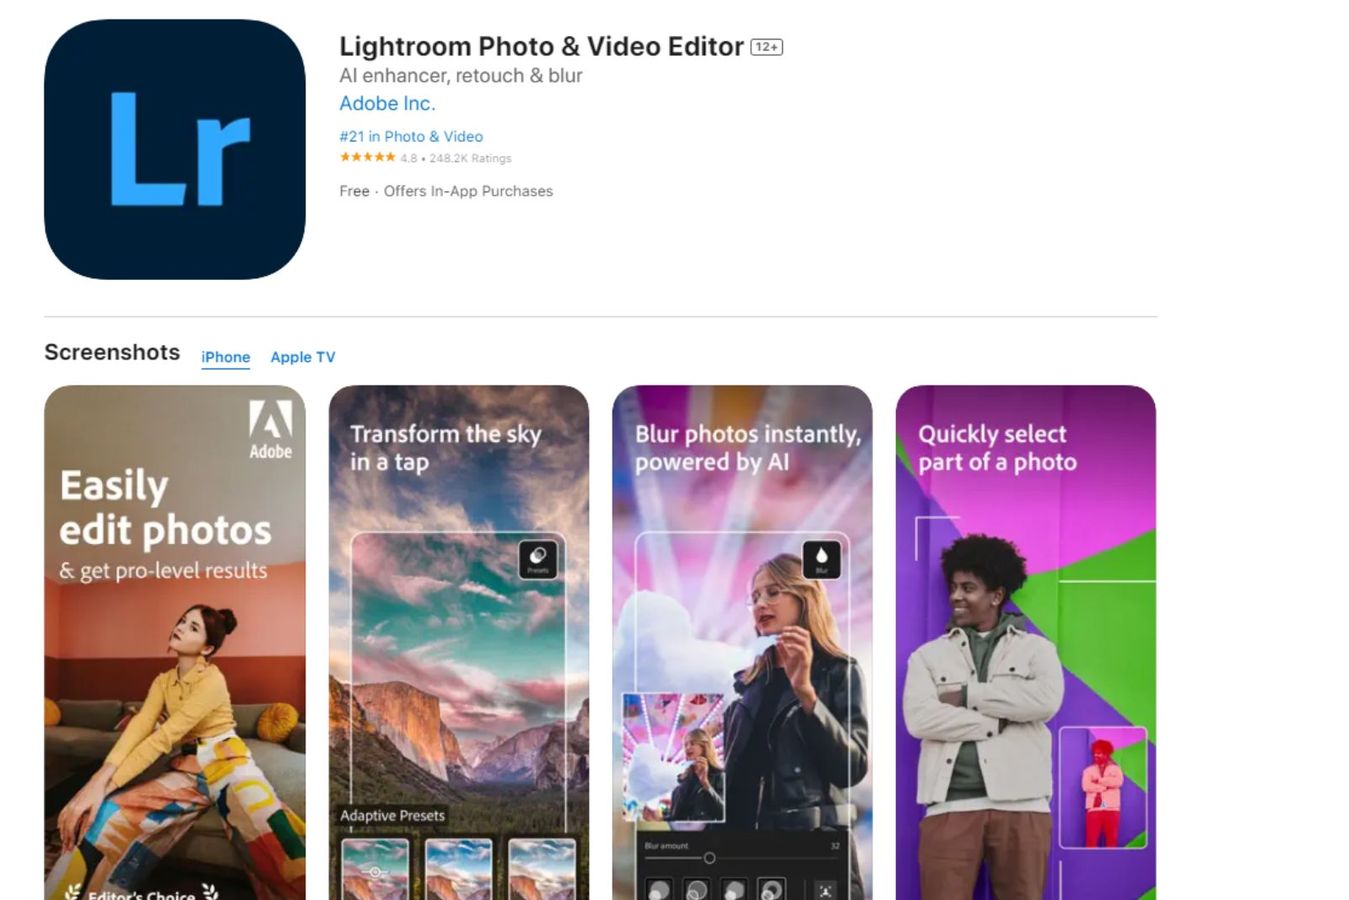 The best photoshop apps for iPhone